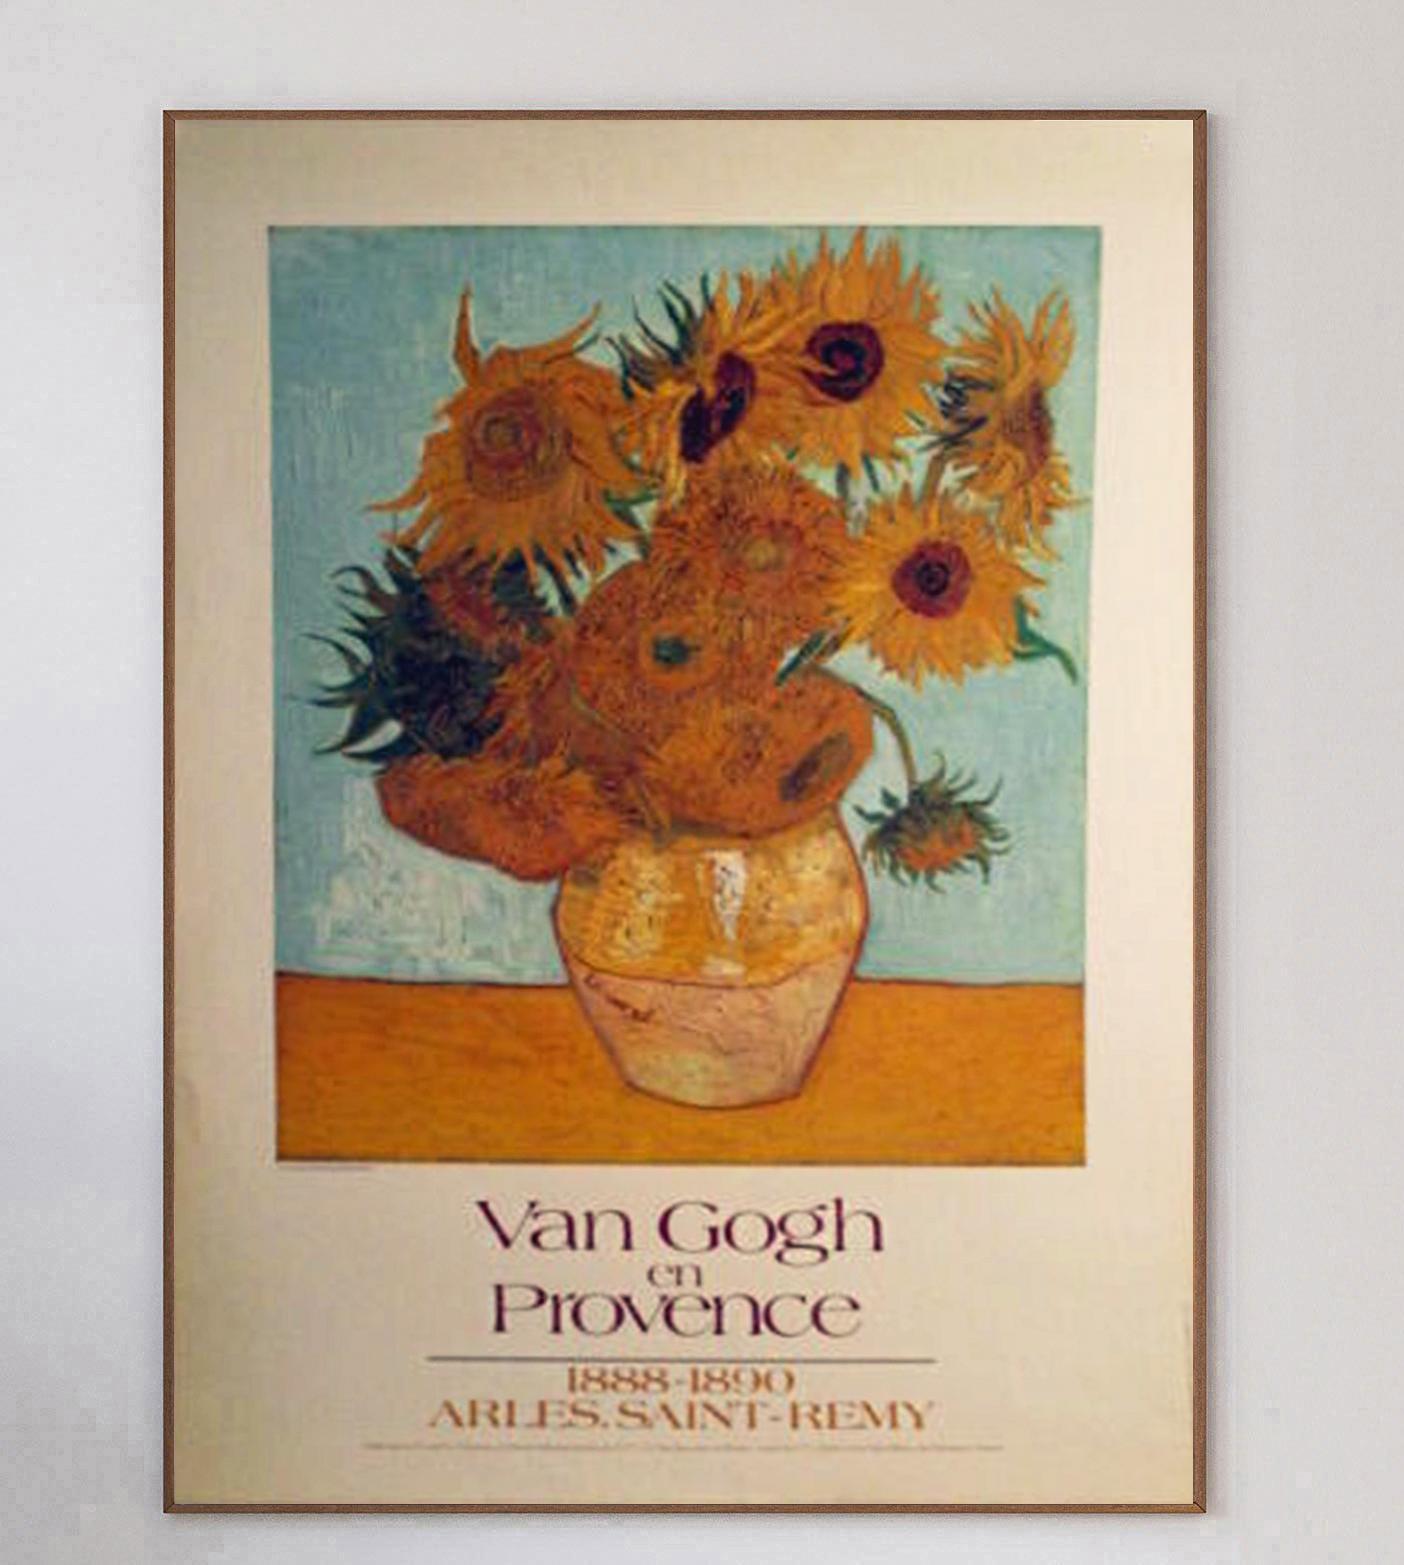 Beautiful poster advertising an exhibition of the legendary Dutch expressionist painter Vincent Van Gogh. Celebrating his period in Provence between Arles and Saint Remy, this beautiful piece depicts his 1888 masterpiece 